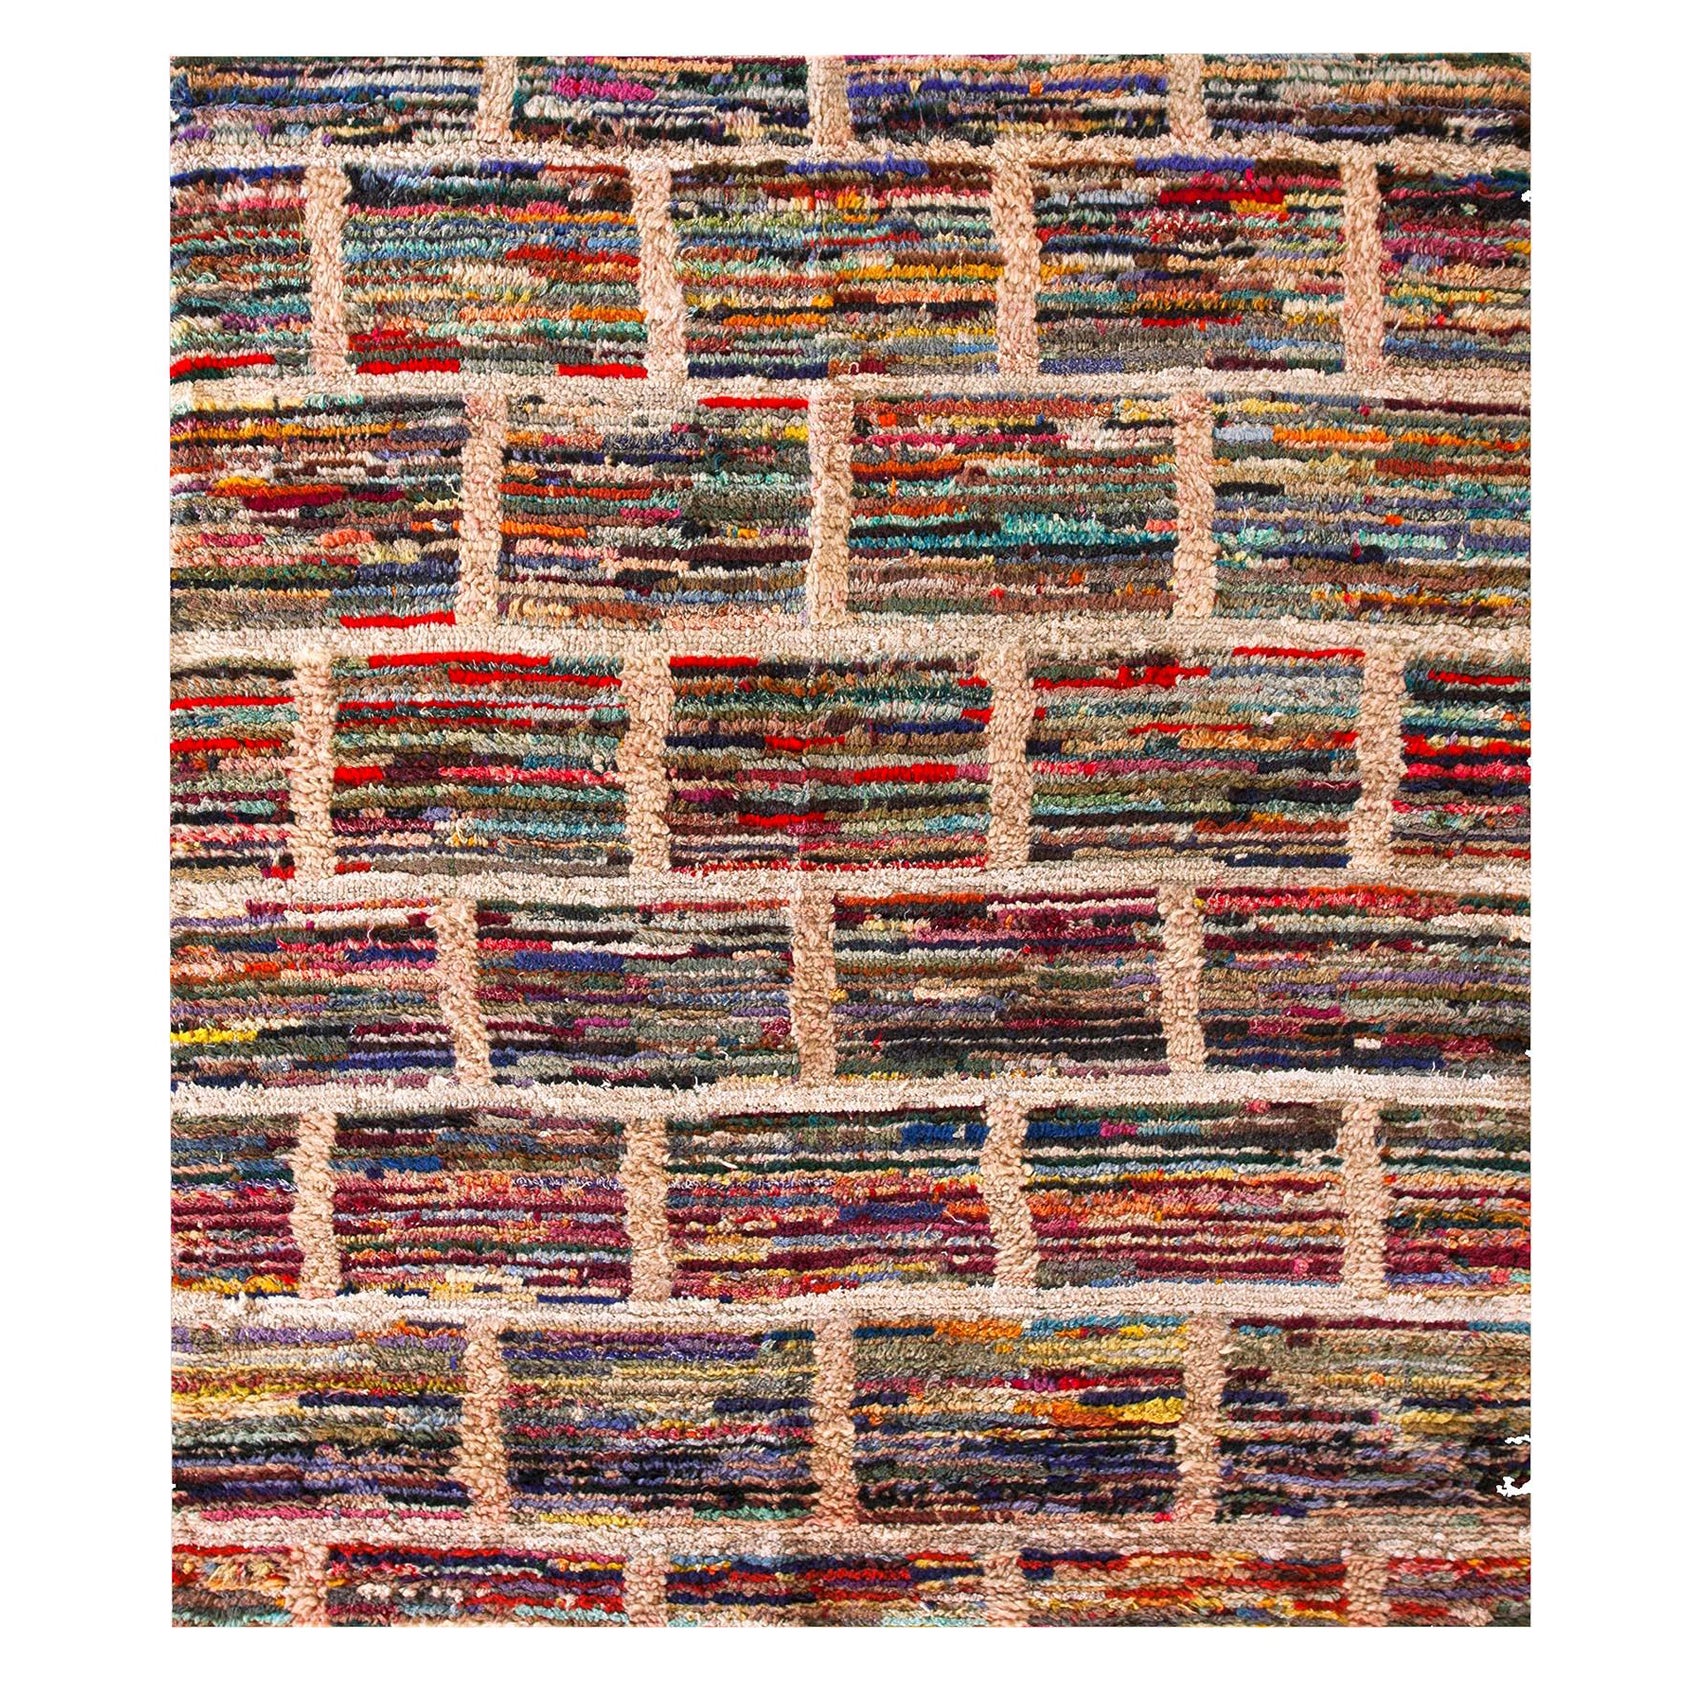 1930s American Hooked Rug ( 3'3" x 3'10" - 99 x 116 ) For Sale